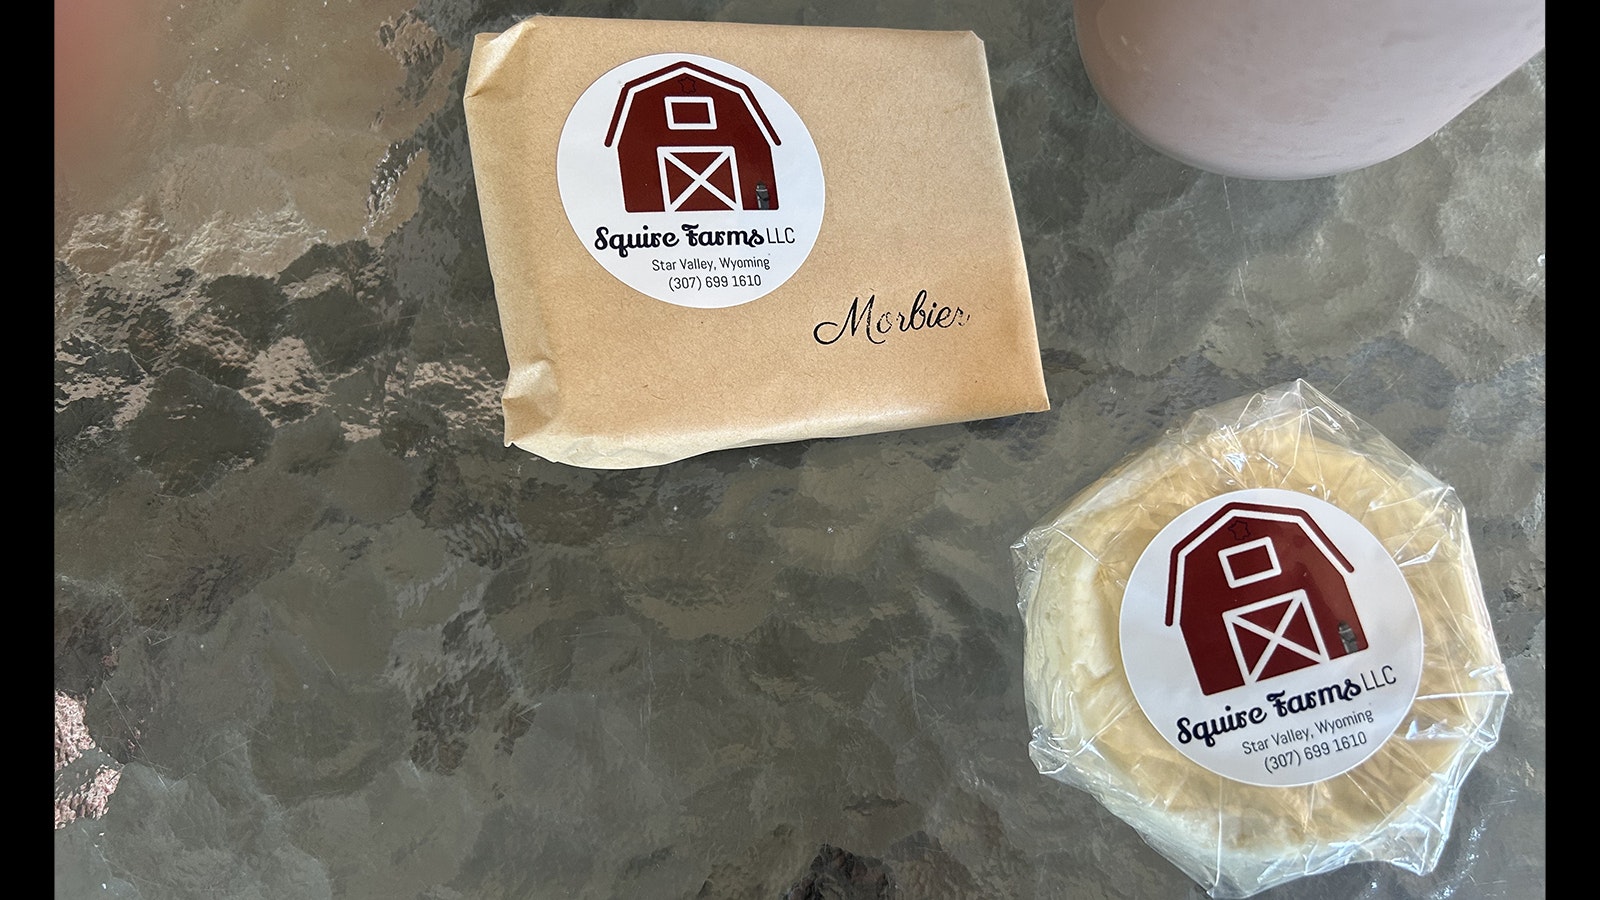 A variety of French hard cheeses are made at Squire Farms in Star Valley, Wyoming.